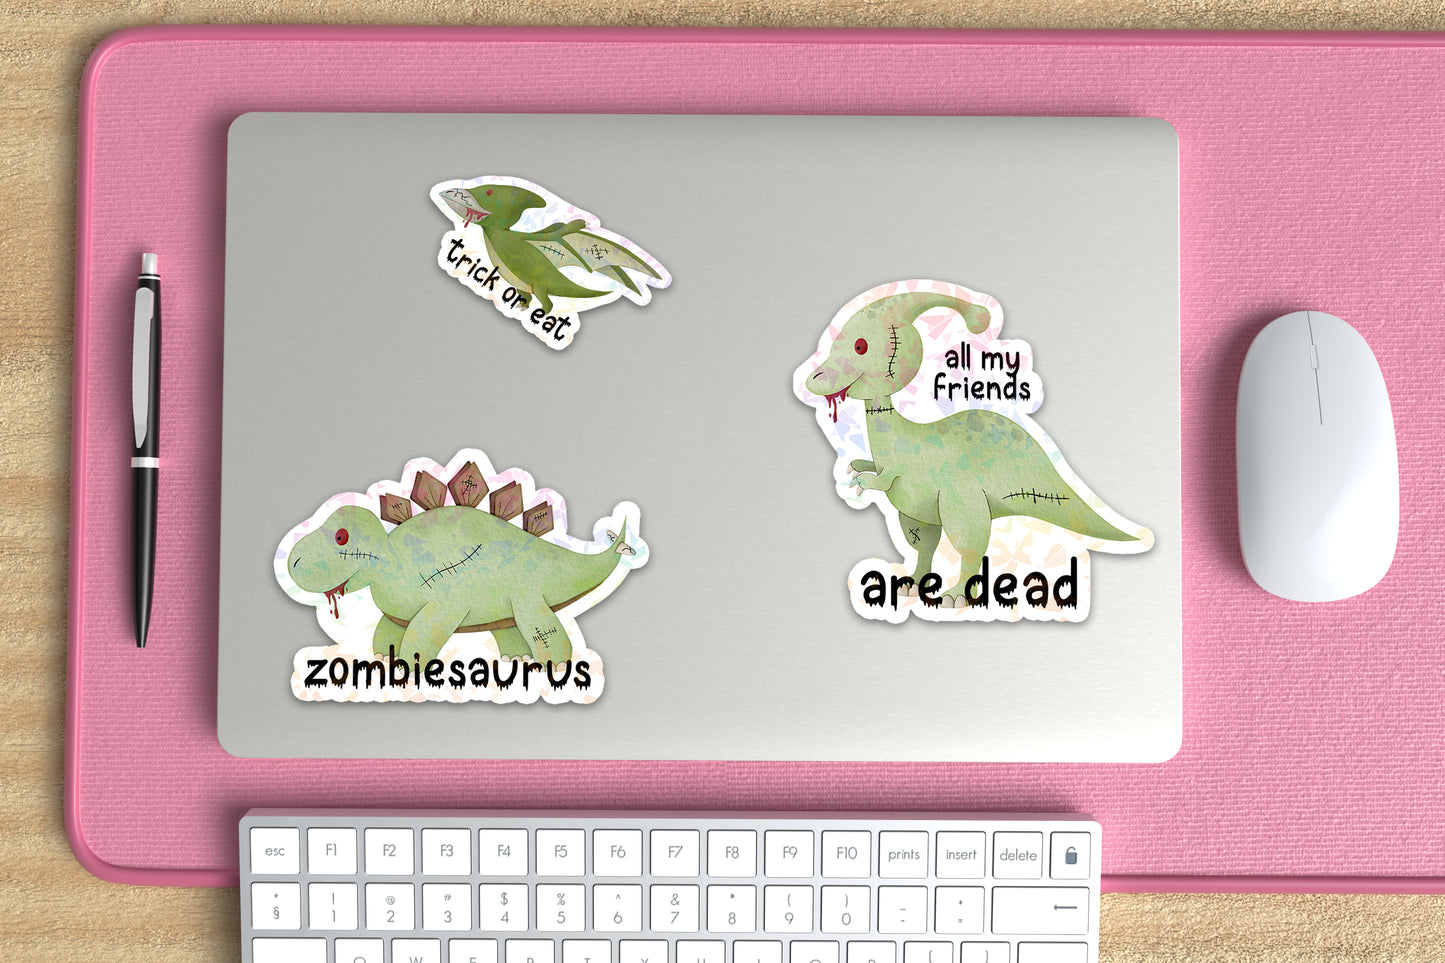 Zombiesaurus Sticker for Cups, Zombie Sticker for Water Bottle, Funny Dinosaur Sticker for Kids, Dinosaur Gifts for Adults, Holographic